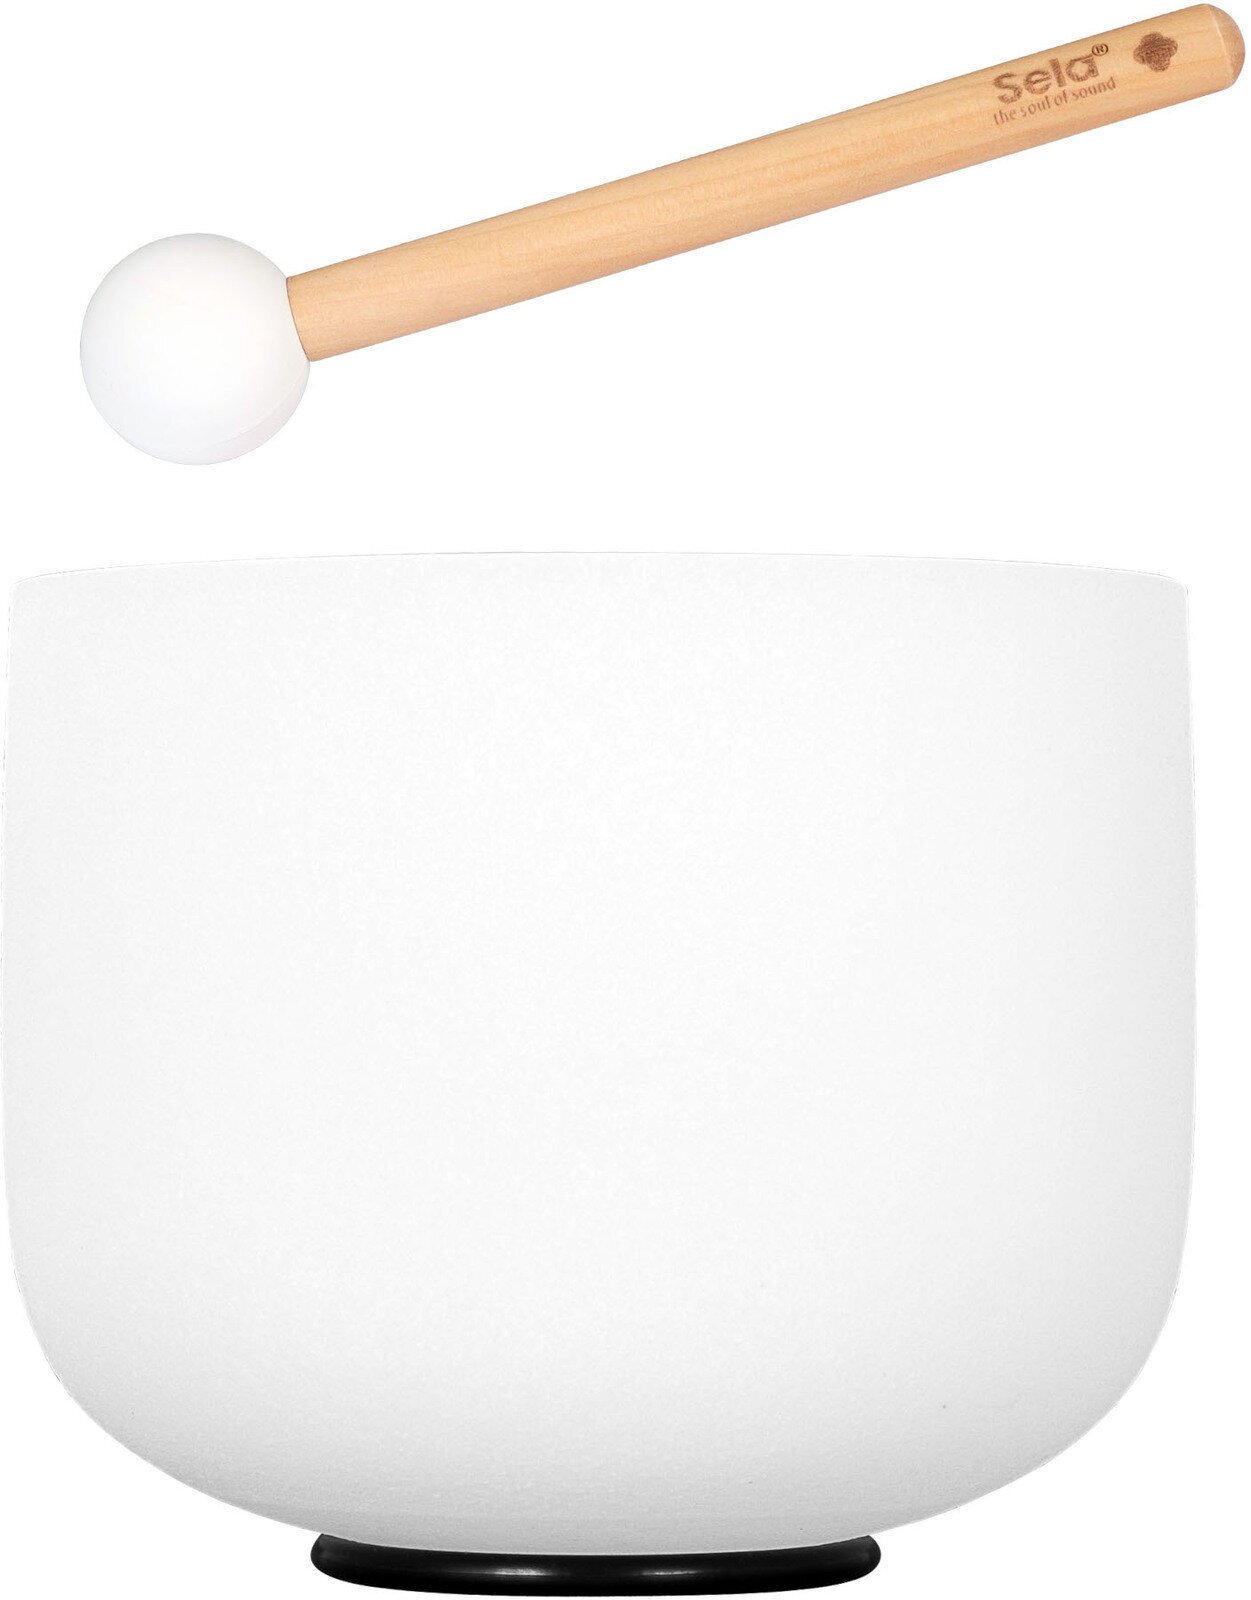 Sela 10" Crystal Singing Bowl Frosted 440 Hz E incl. 1 Wood Mallet Sela